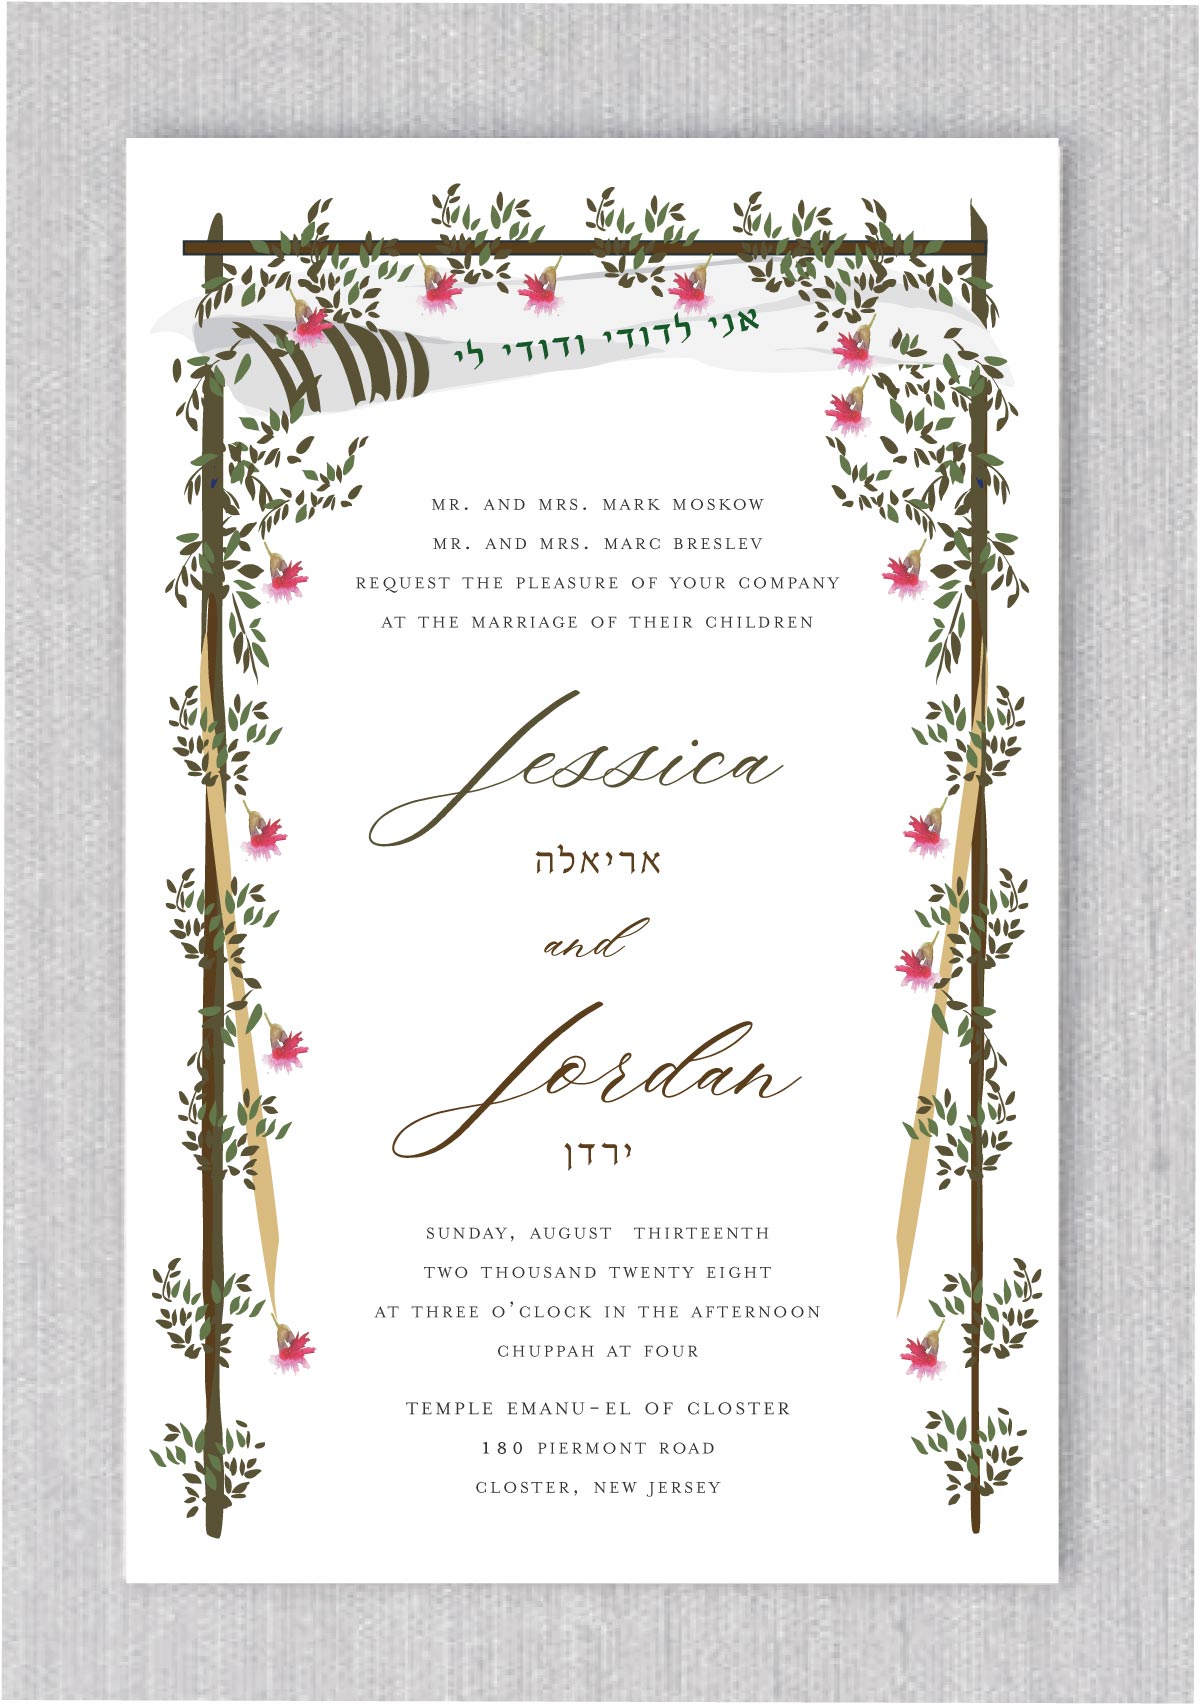 Your Tallit and Chuppah Arch - Email Paperless Jewish Wedding Invitation a fresh and vibrant feel. The combination of the wooden Chuppah and the tallit, which is a traditional Jewish prayer shawl, symbolizes the blending of modernity and tradition in a beautiful way.